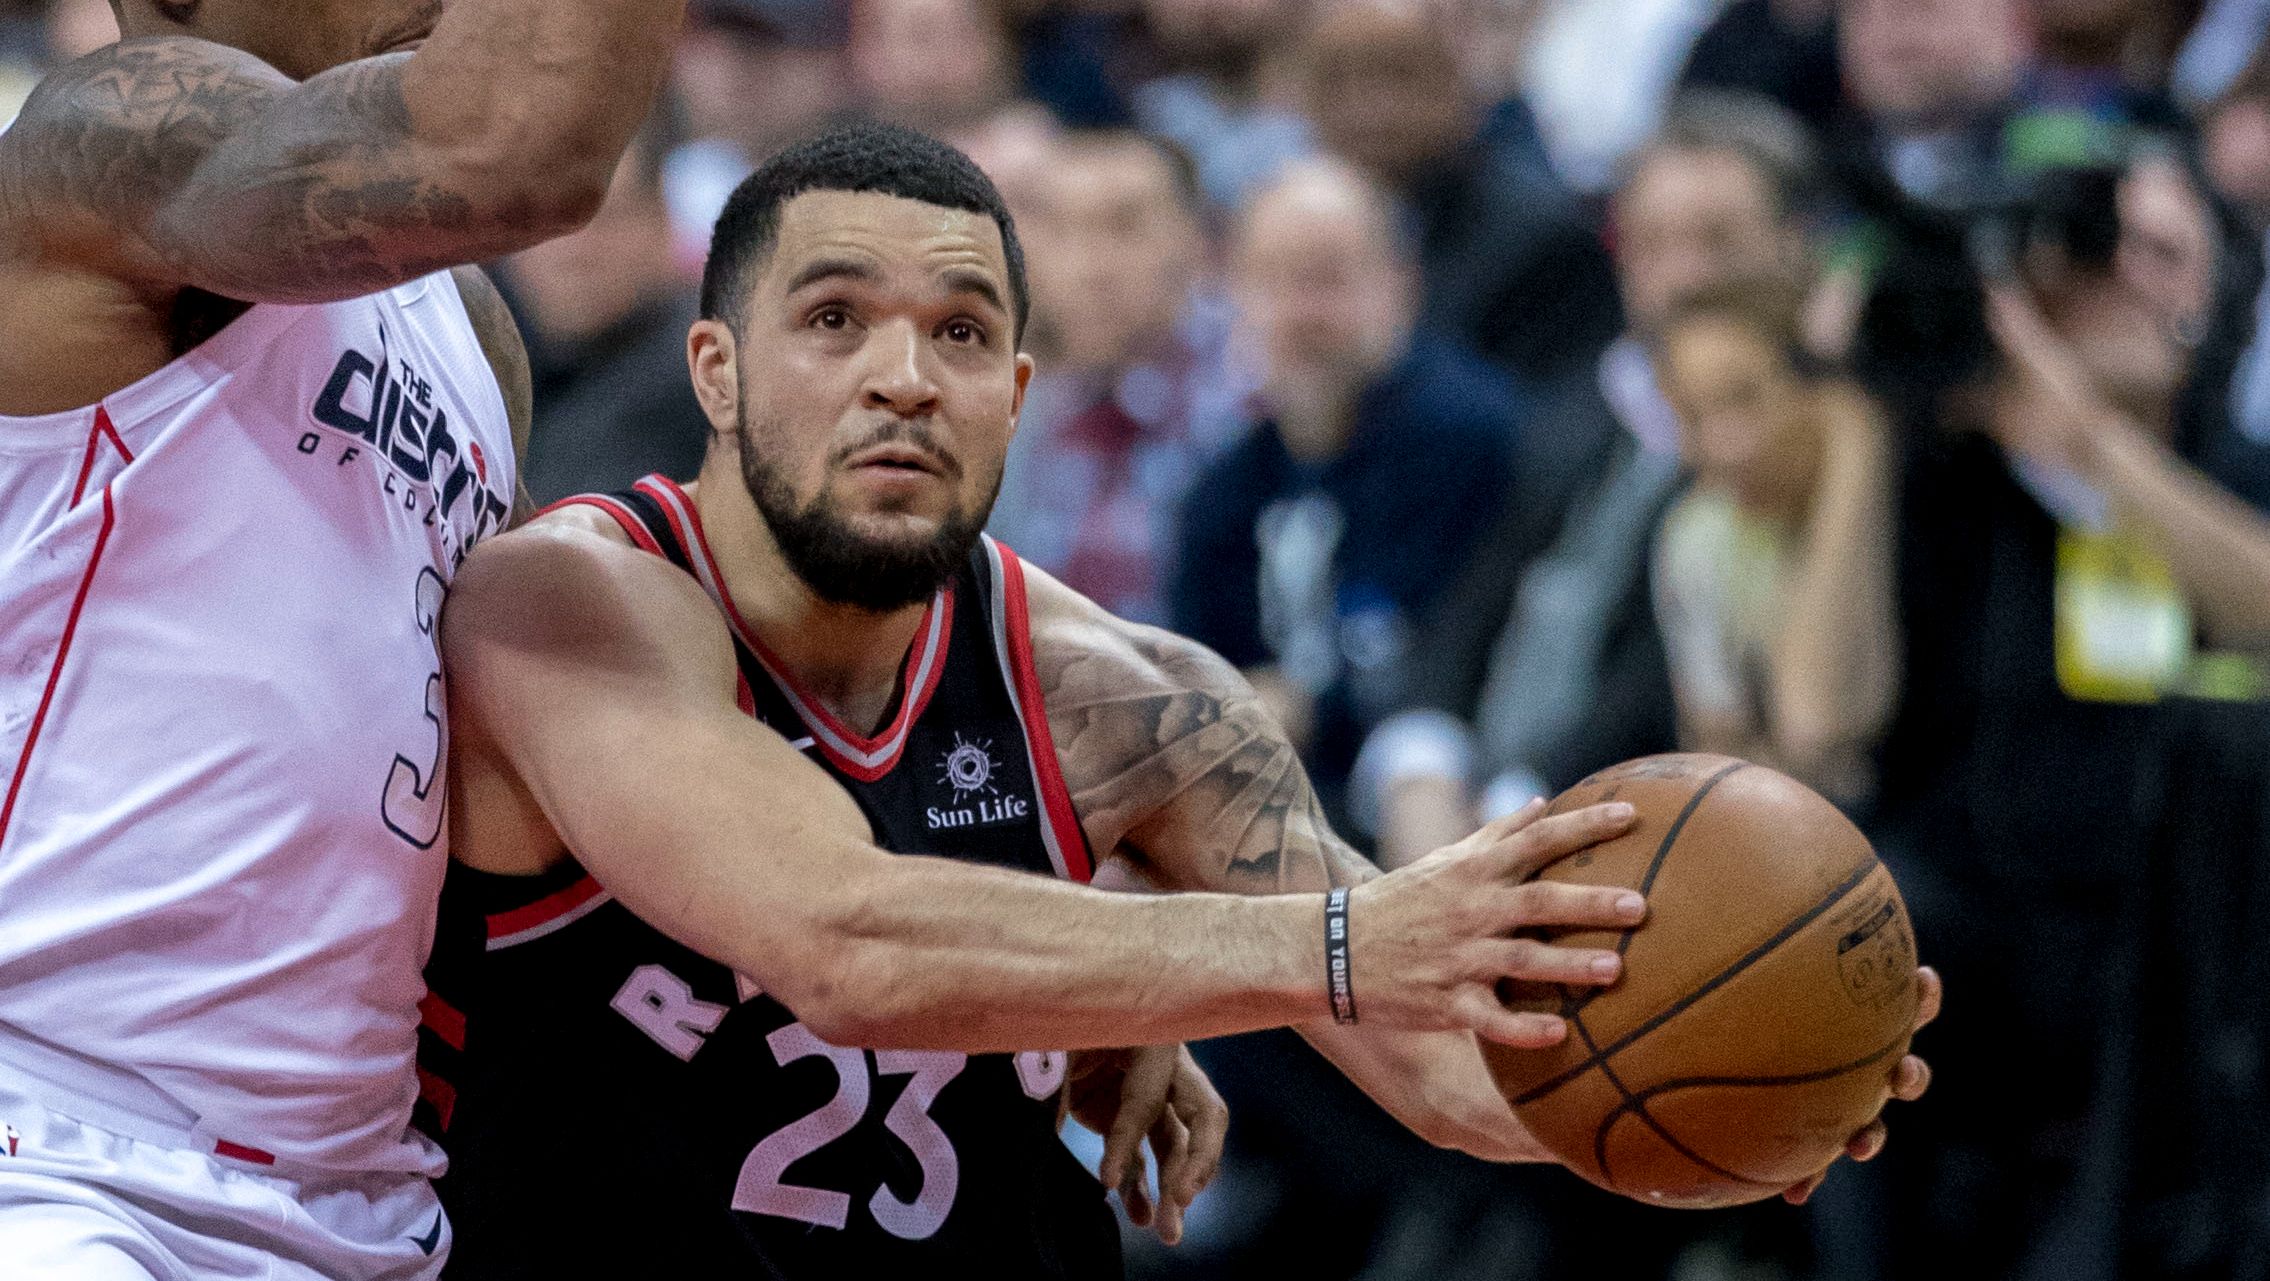 Fred VanVleet trying to score against the Wizards